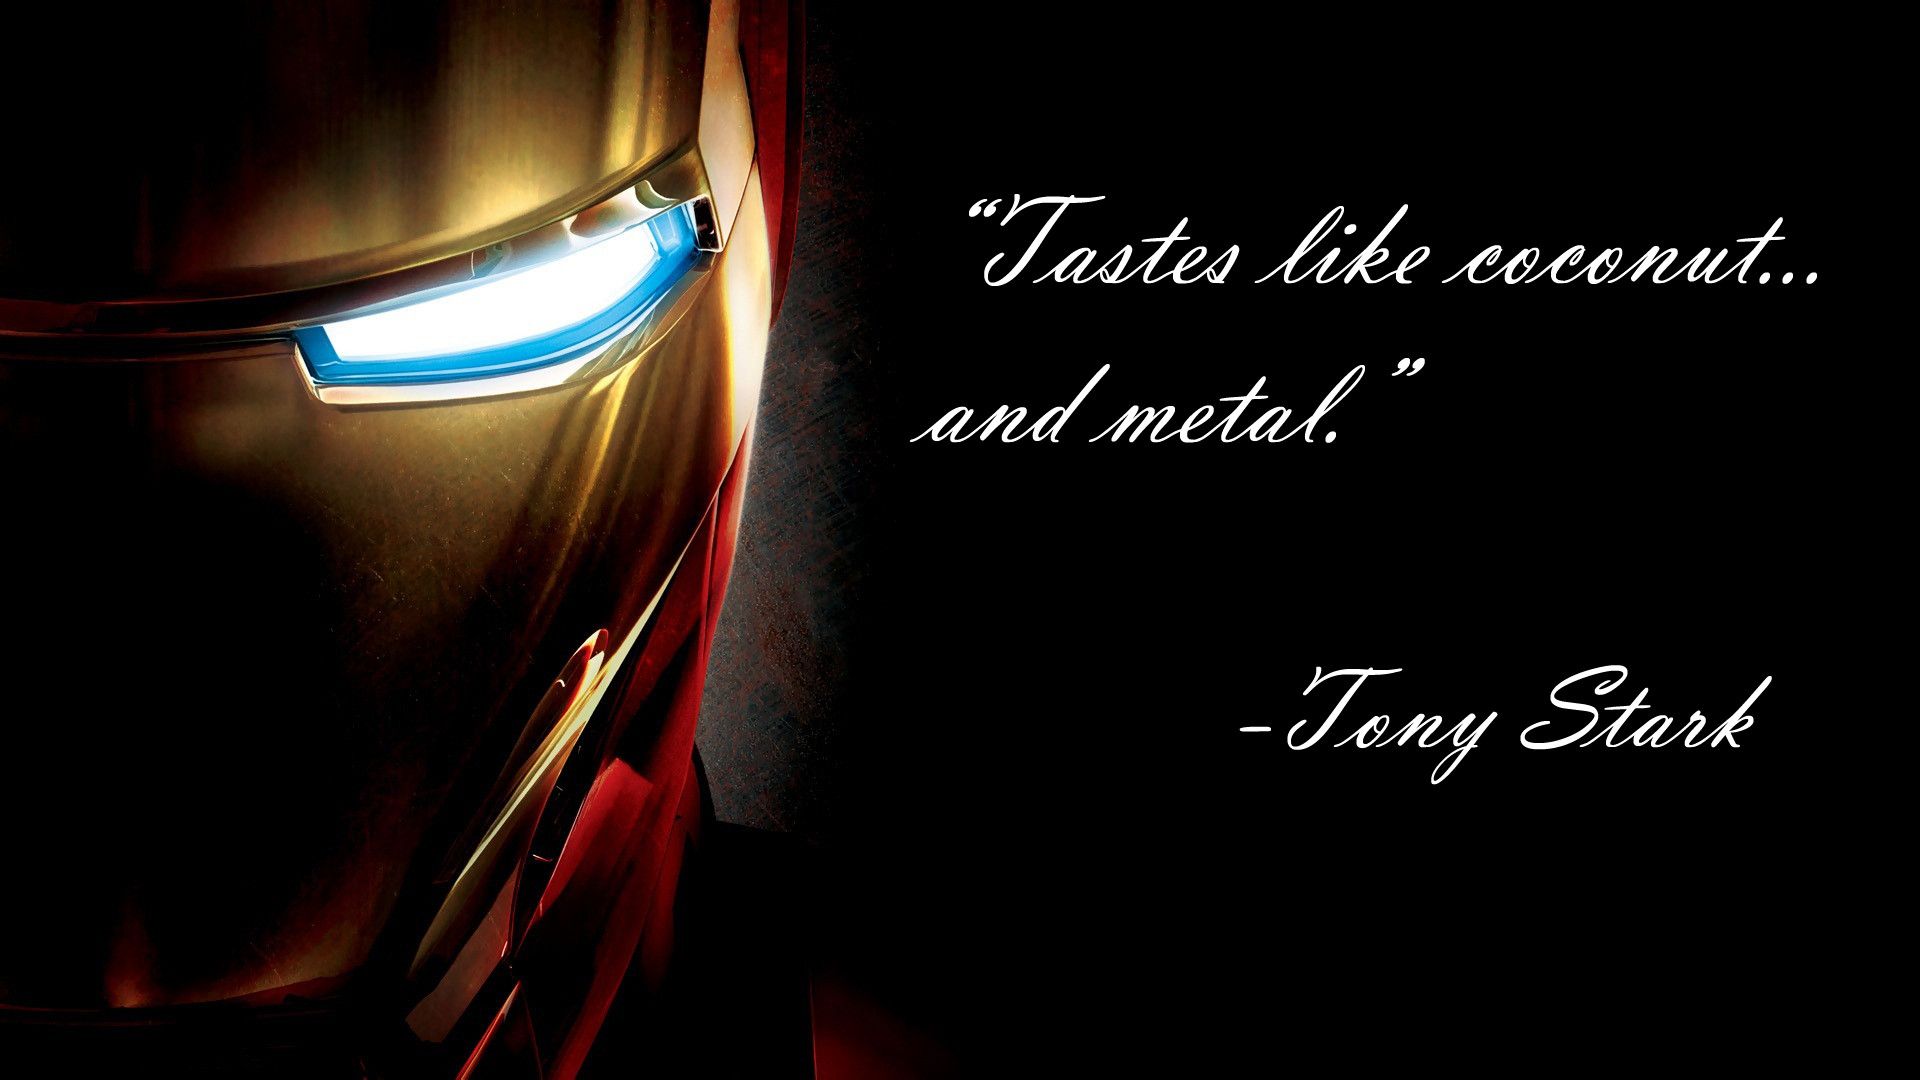 Heard this quote in Iron Man 2 and just had to make it a wallpaper